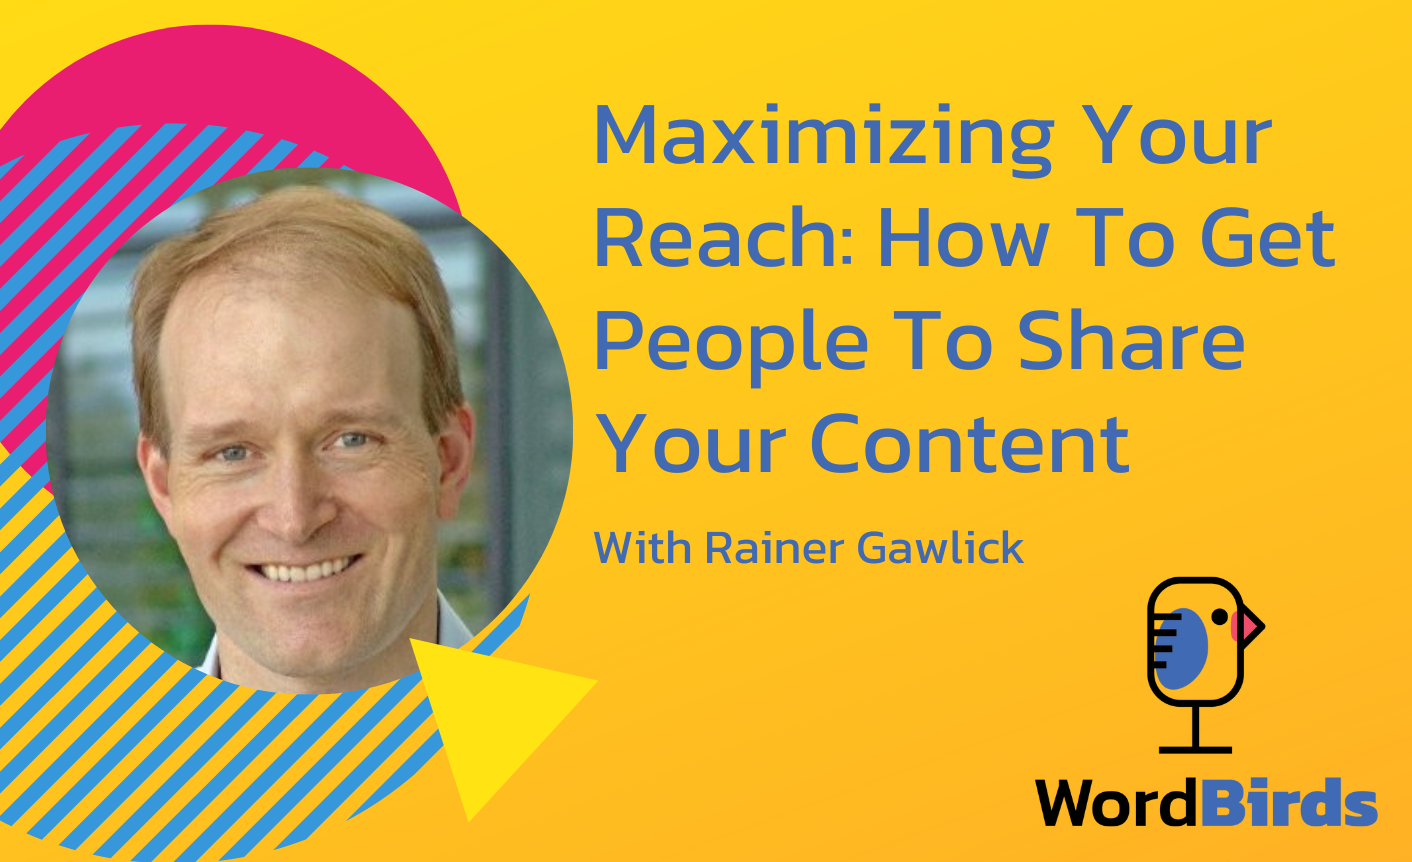 On a yellow background with a headshot of Rainer Gawlick on the left, the title reads "Maximizing Your Reach: How To Get People To Share Your Content."